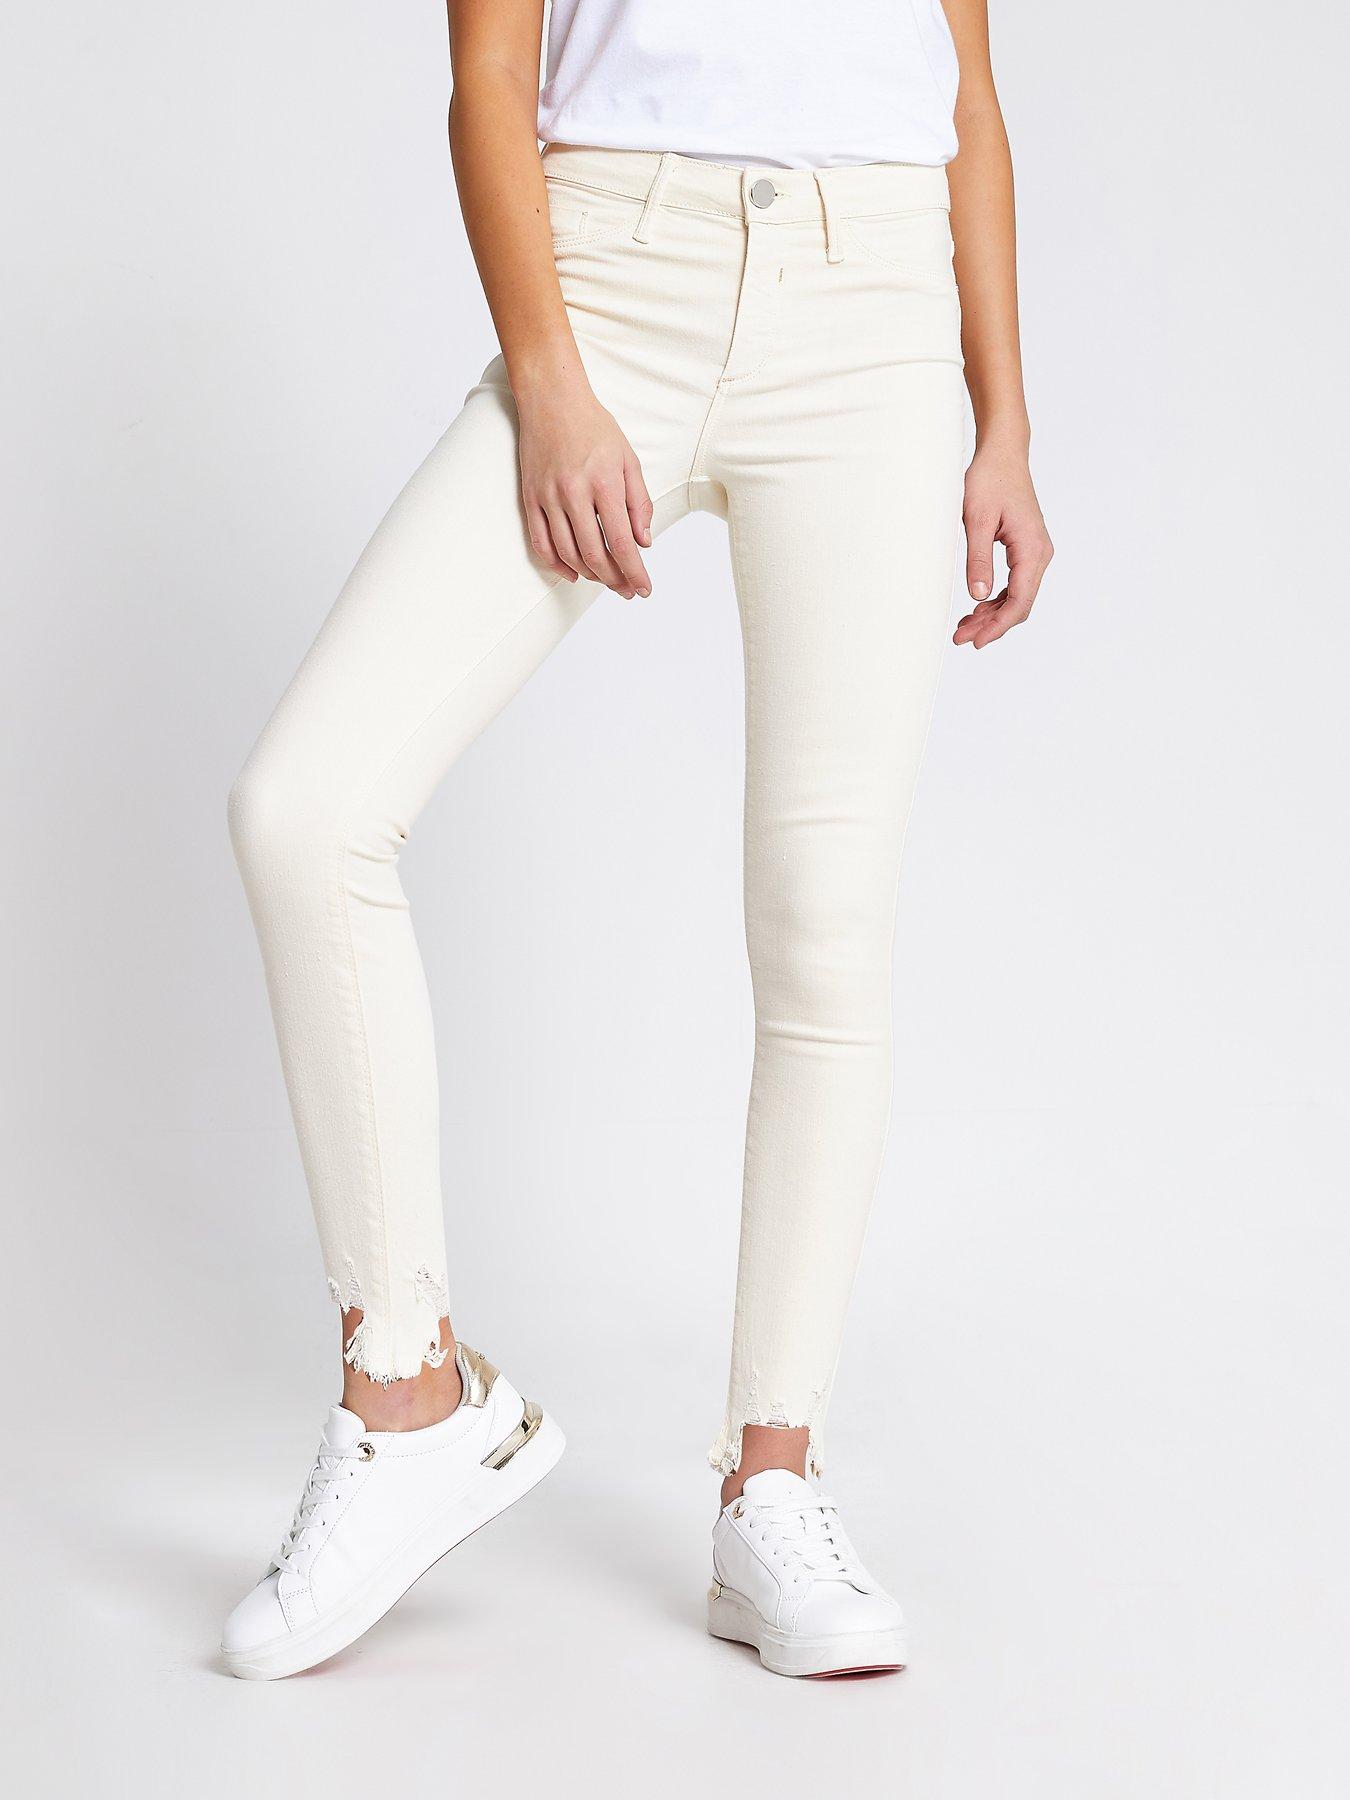 river island molly jeans sale